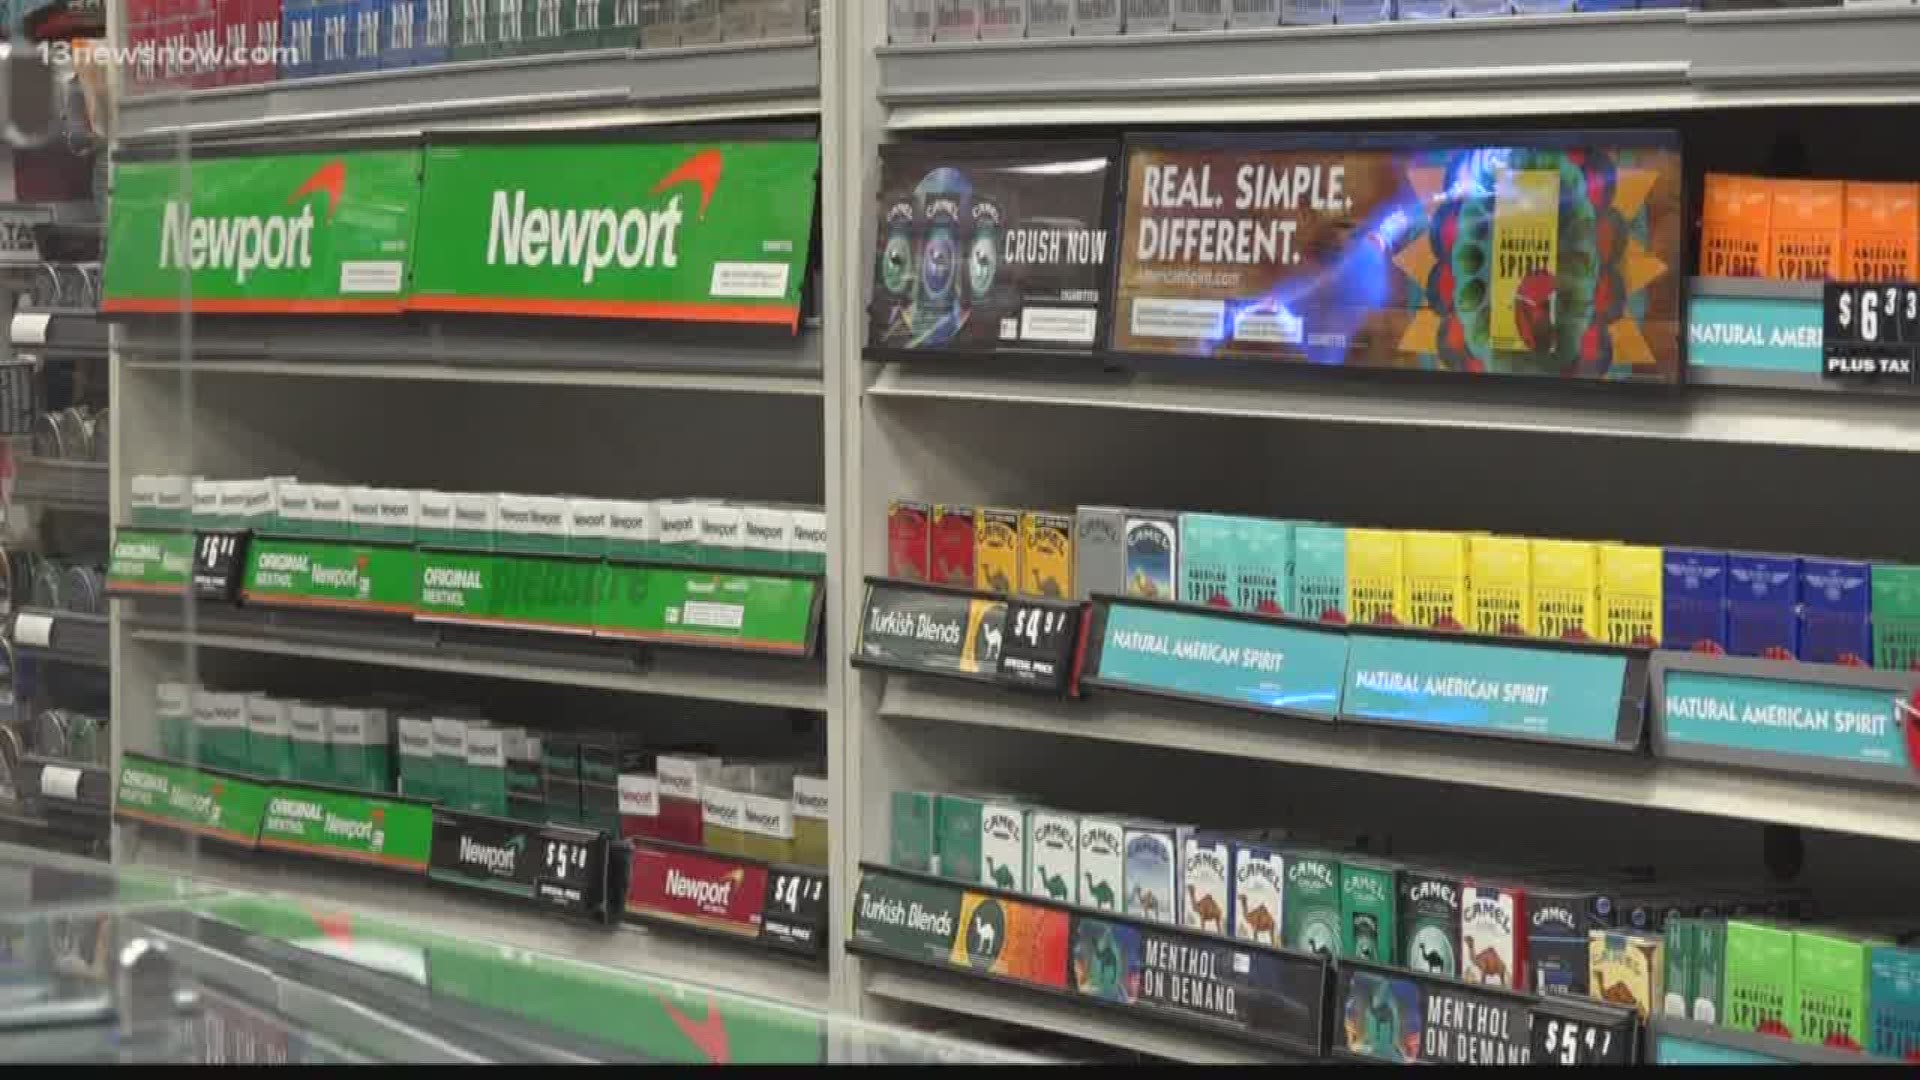 The FDA is pushing a major crackdown on menthol cigarettes and flavored e-cigarettes.